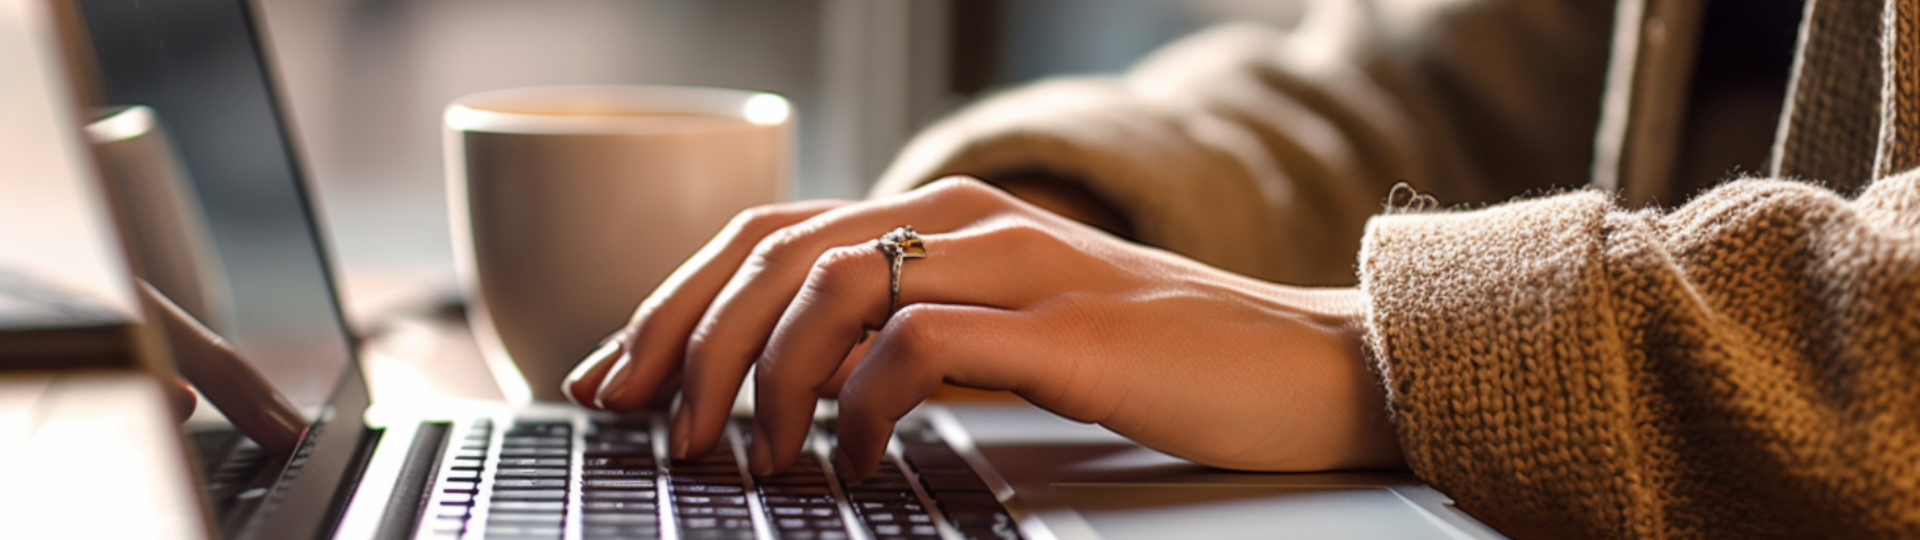 a woman wearing a ring is typing on a laptop